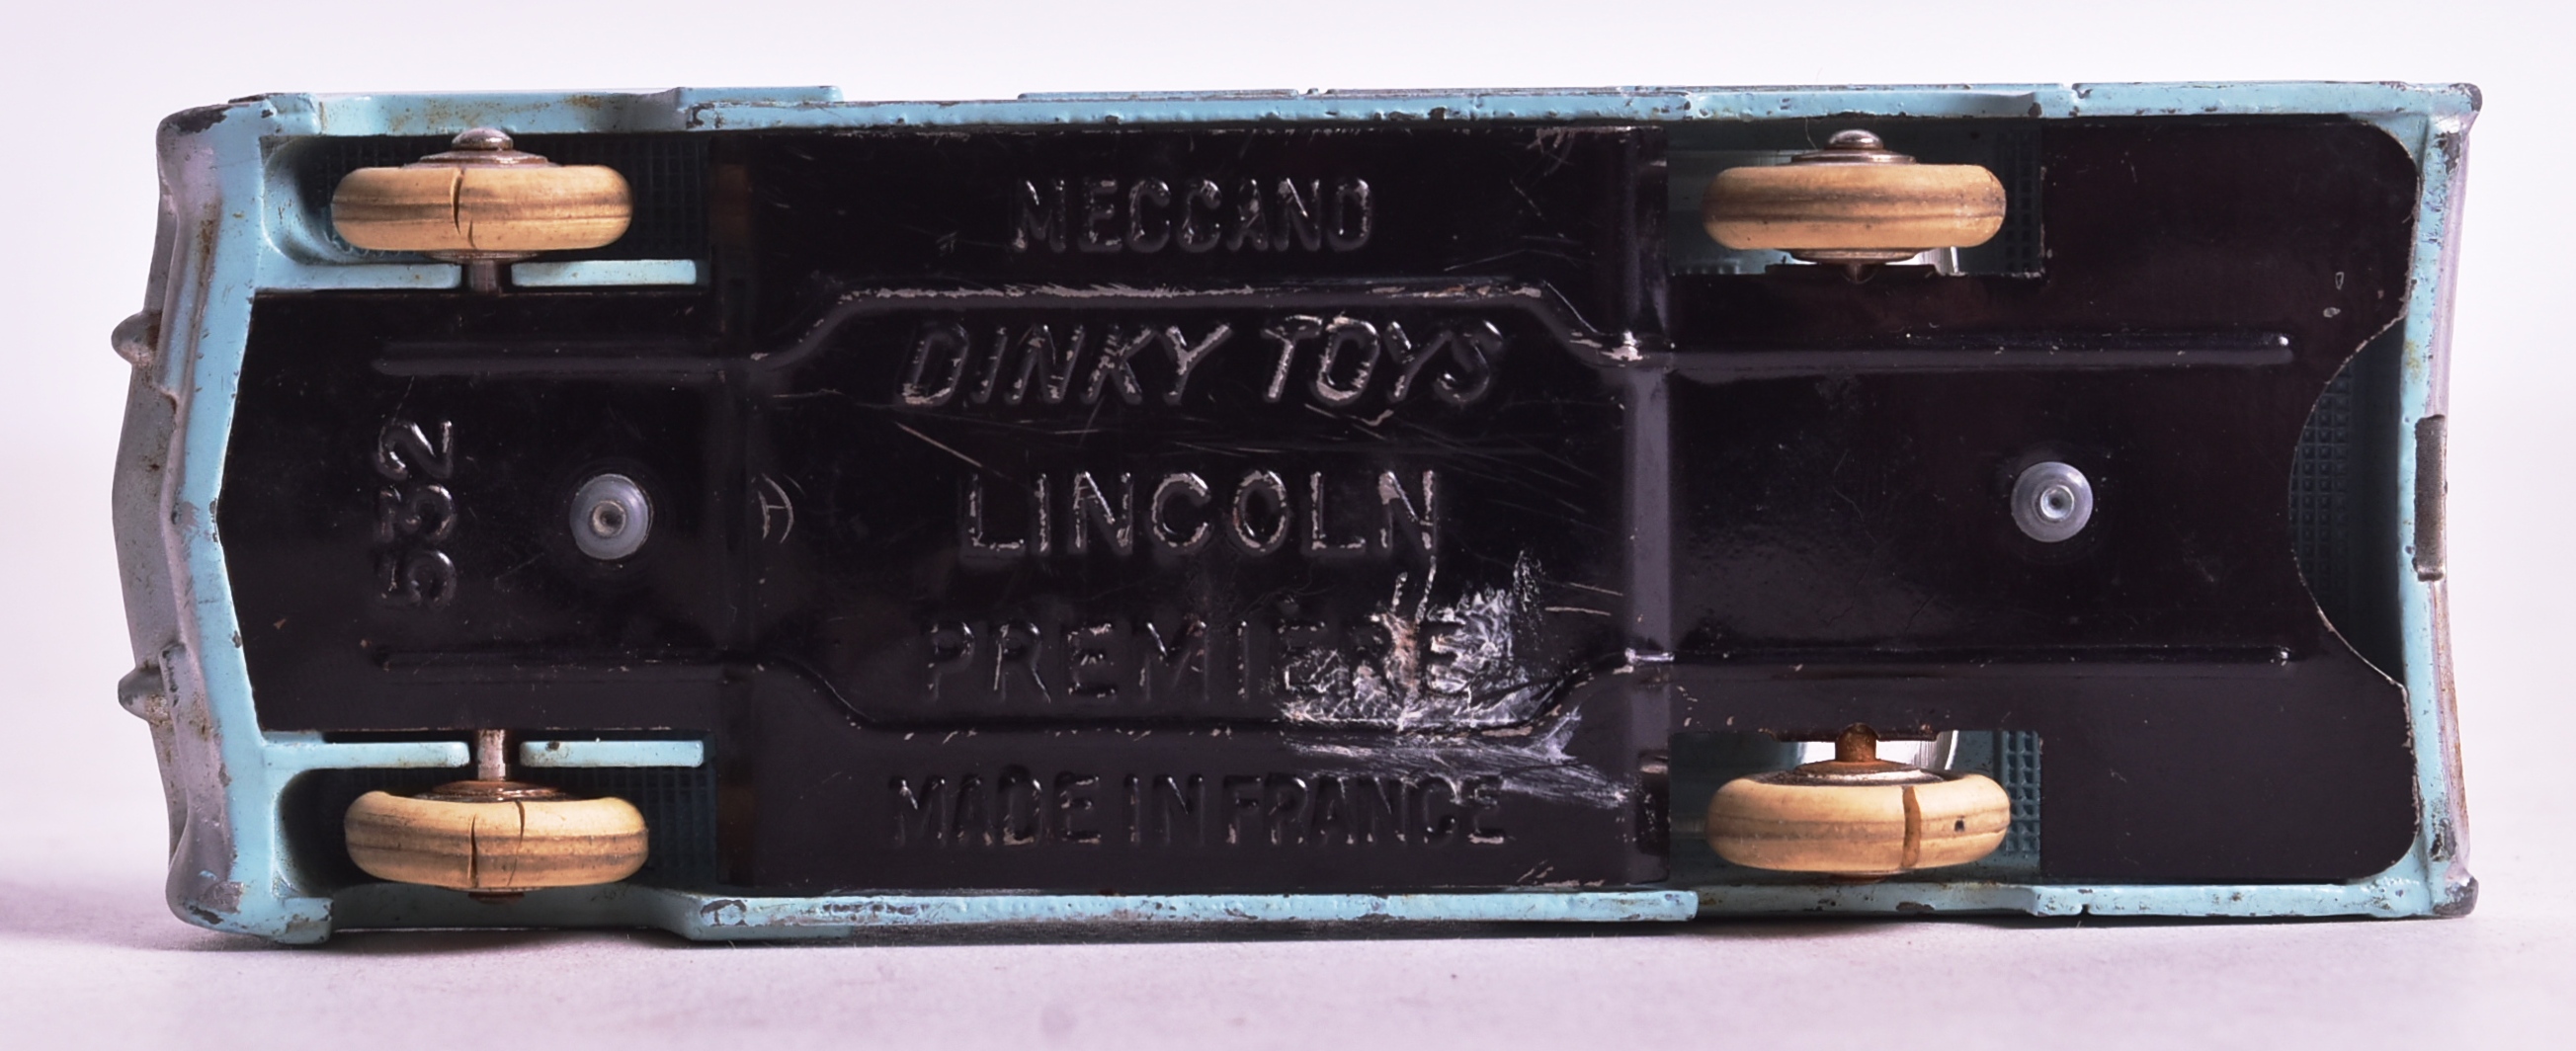 DIECAST - FRENCH DINKY TOYS - LINCOLN PREMIERE - Image 5 of 5